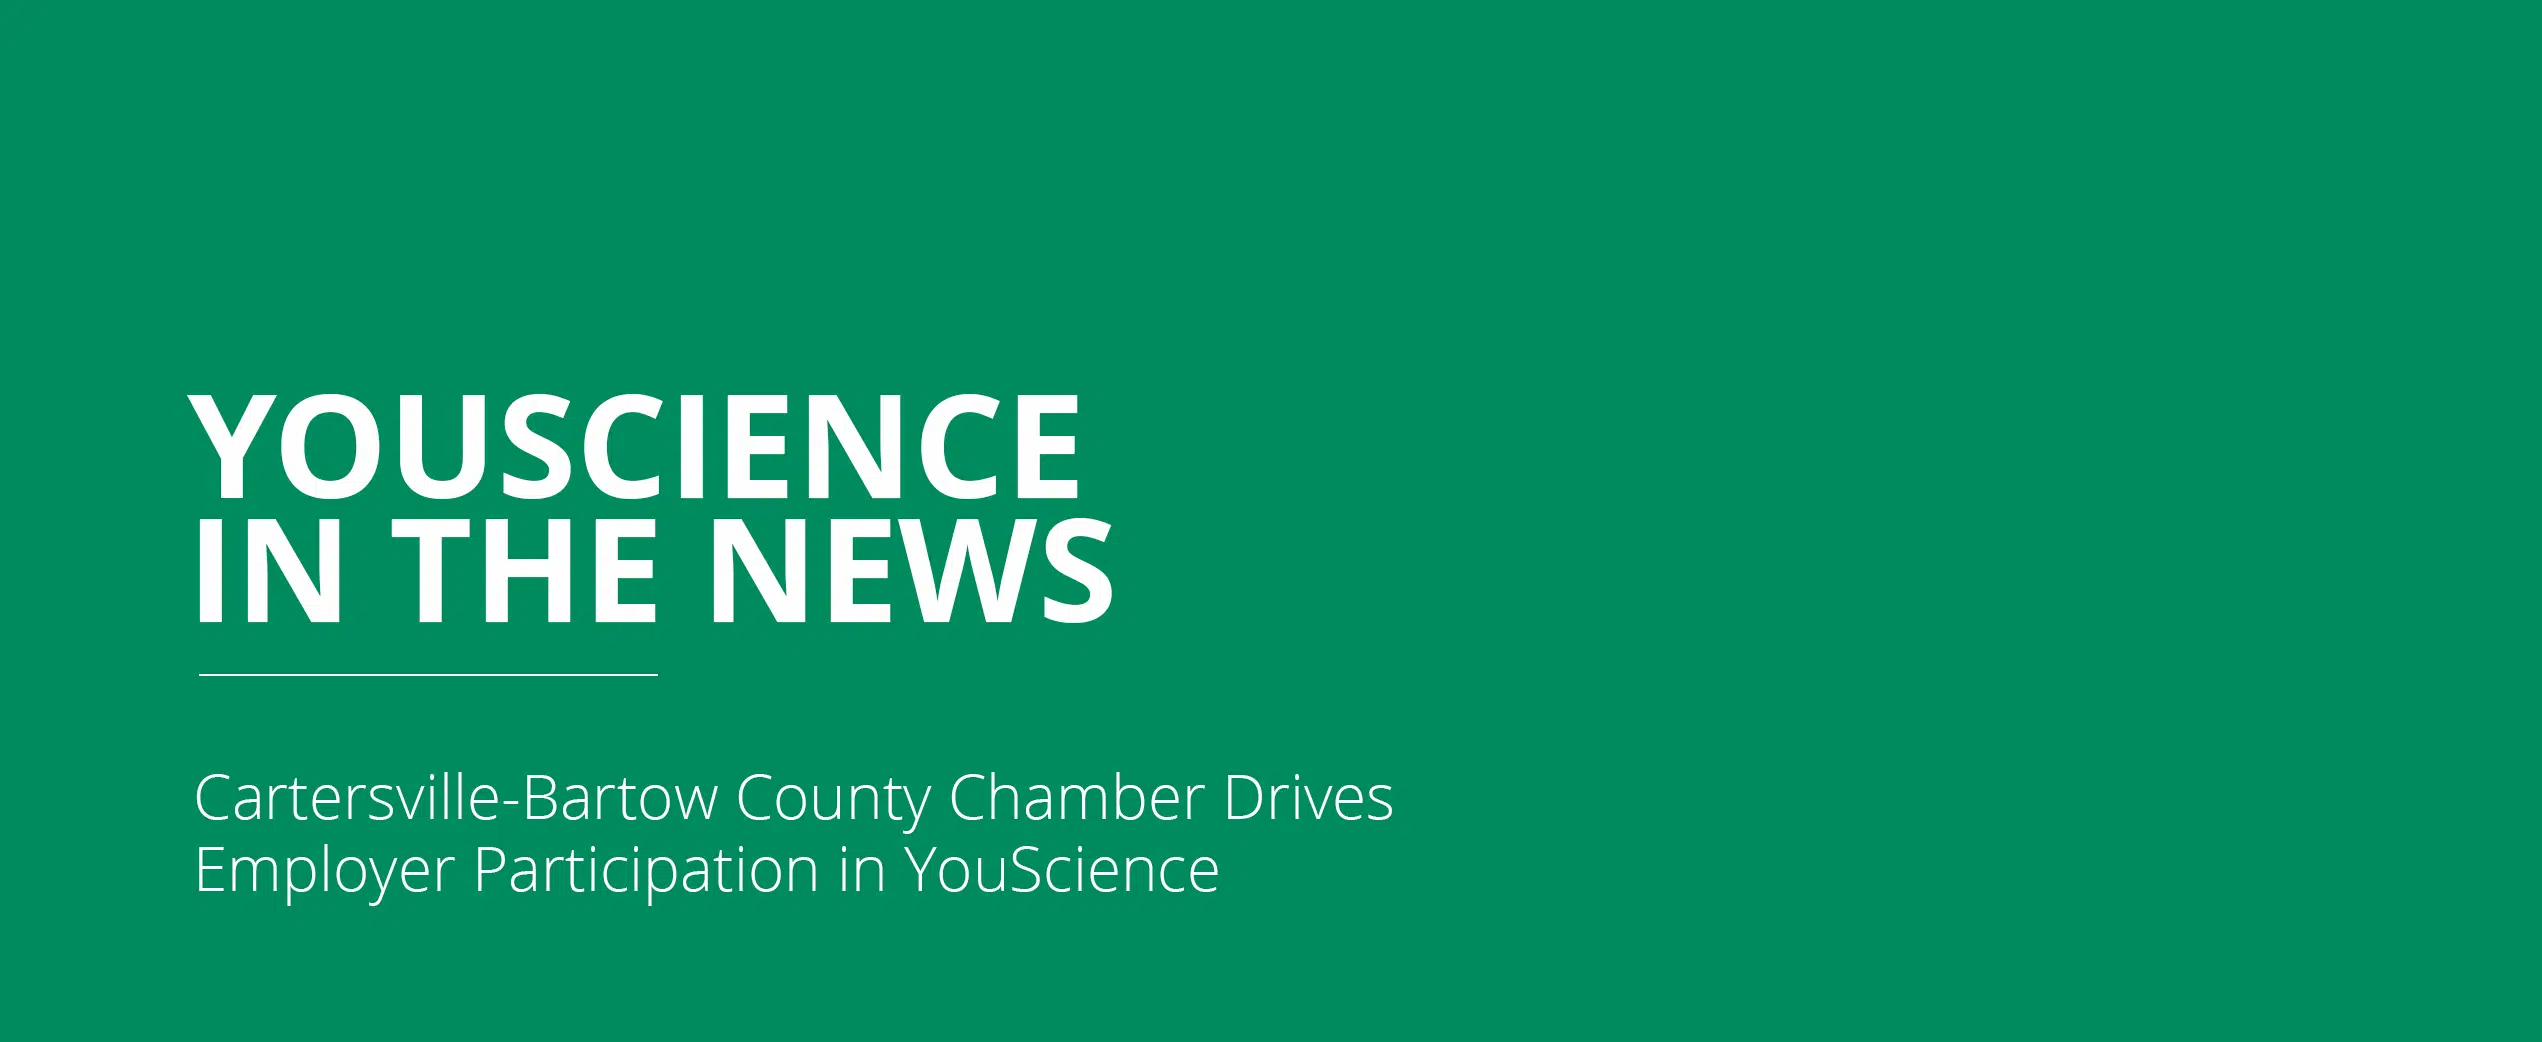 YouScience In the News: Cartersville-Bartow County Chamber Drives Employer Participation in YouScience